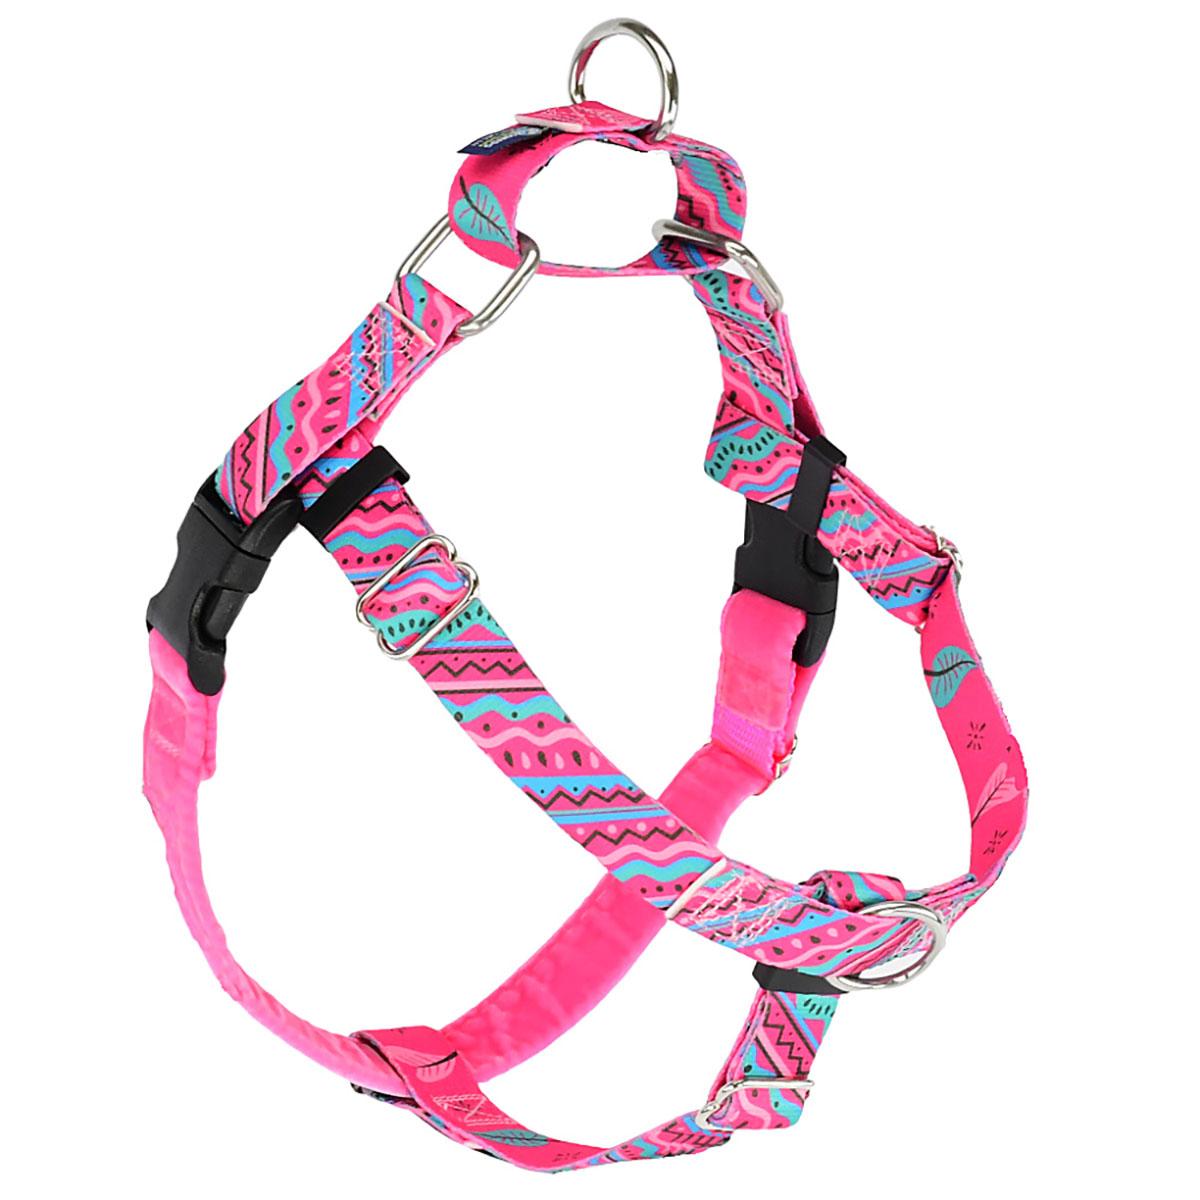 2 Hounds Design EarthStyle Freedom No-Pull Dog Harness - 1980's